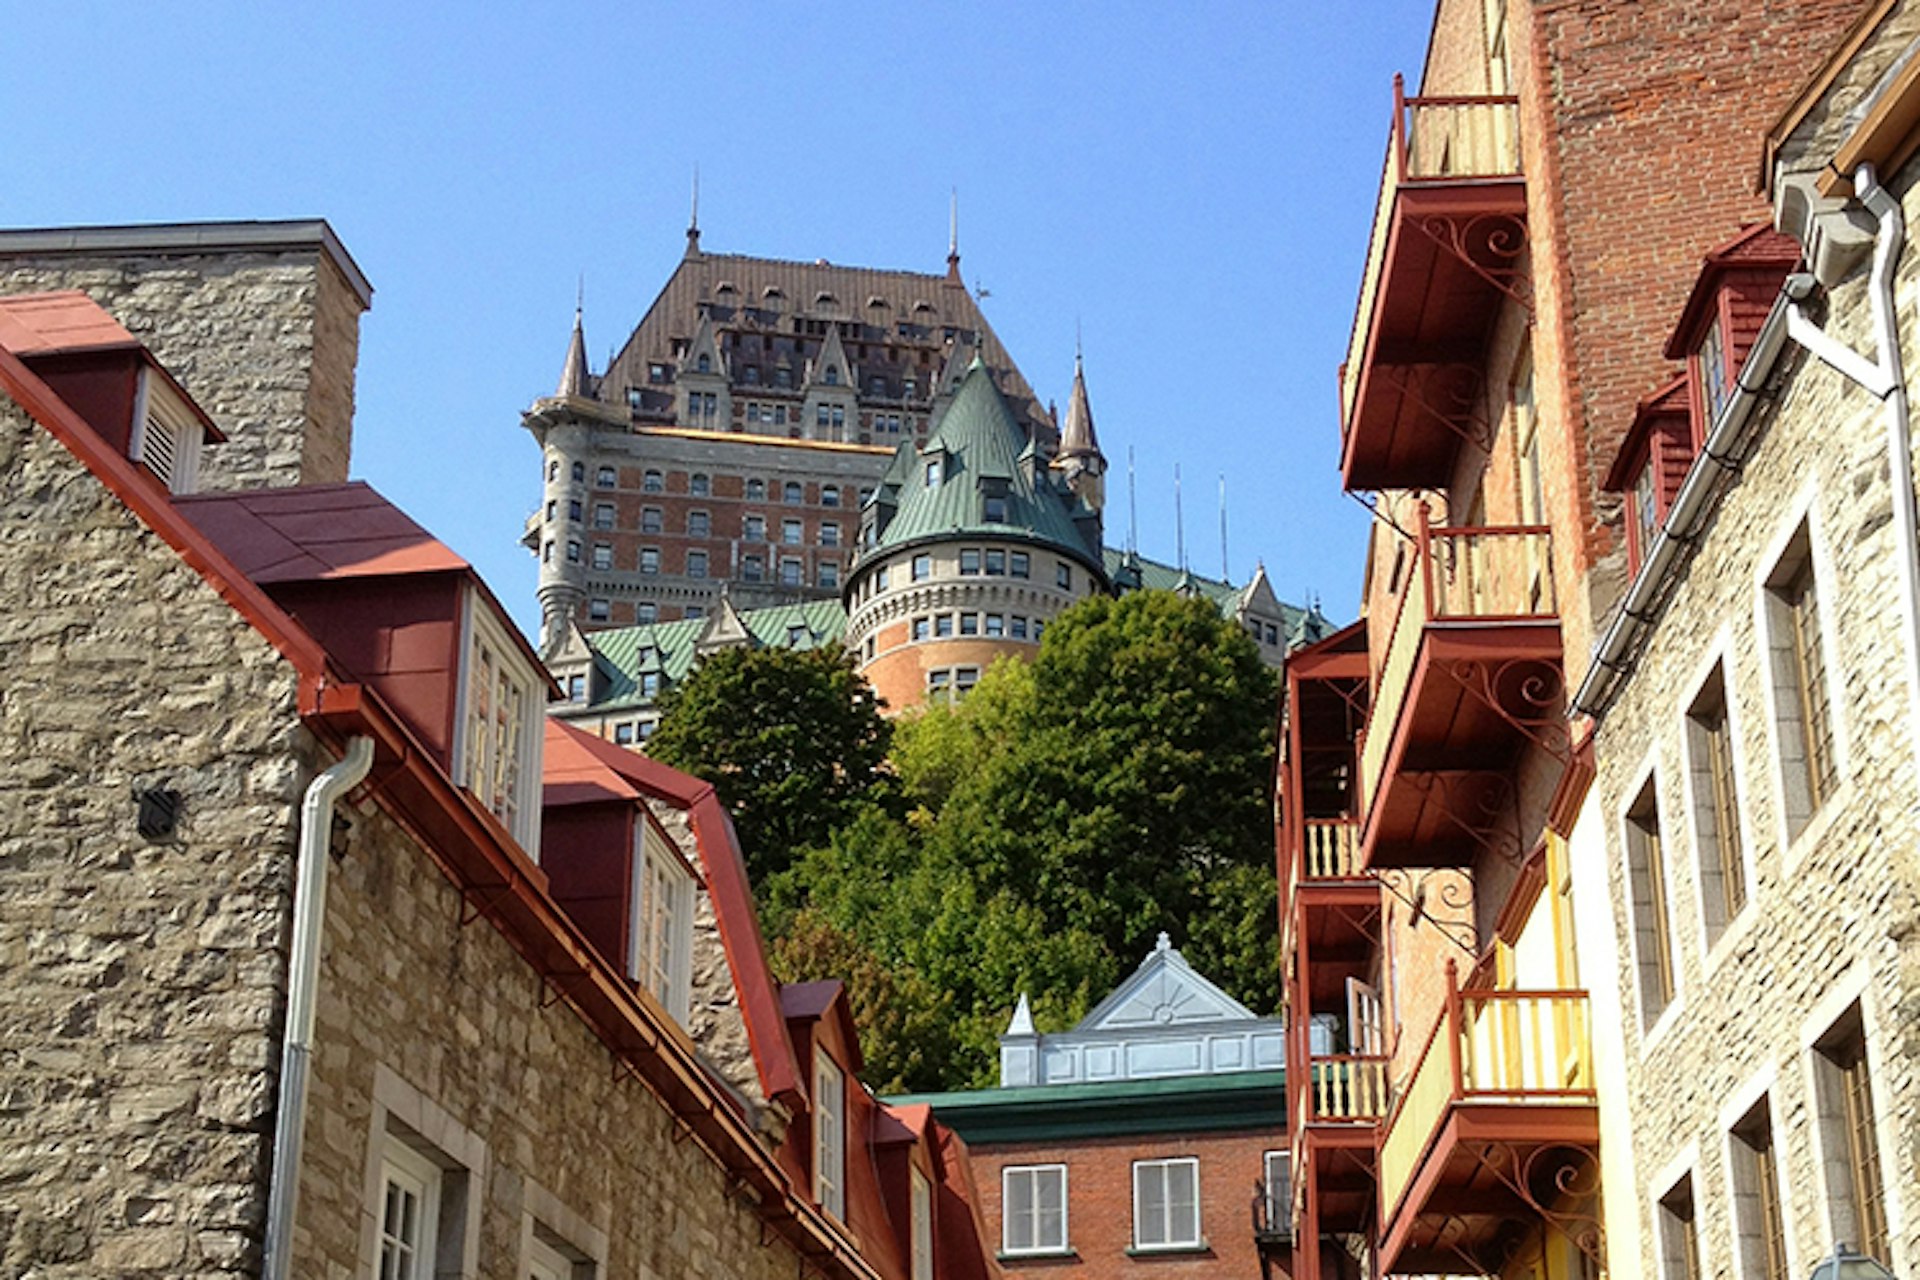 View of Le Chateau Frontenac from the Old Lower Town, Quebec City, Canada. Image by Tim Richards / Lonely Planet